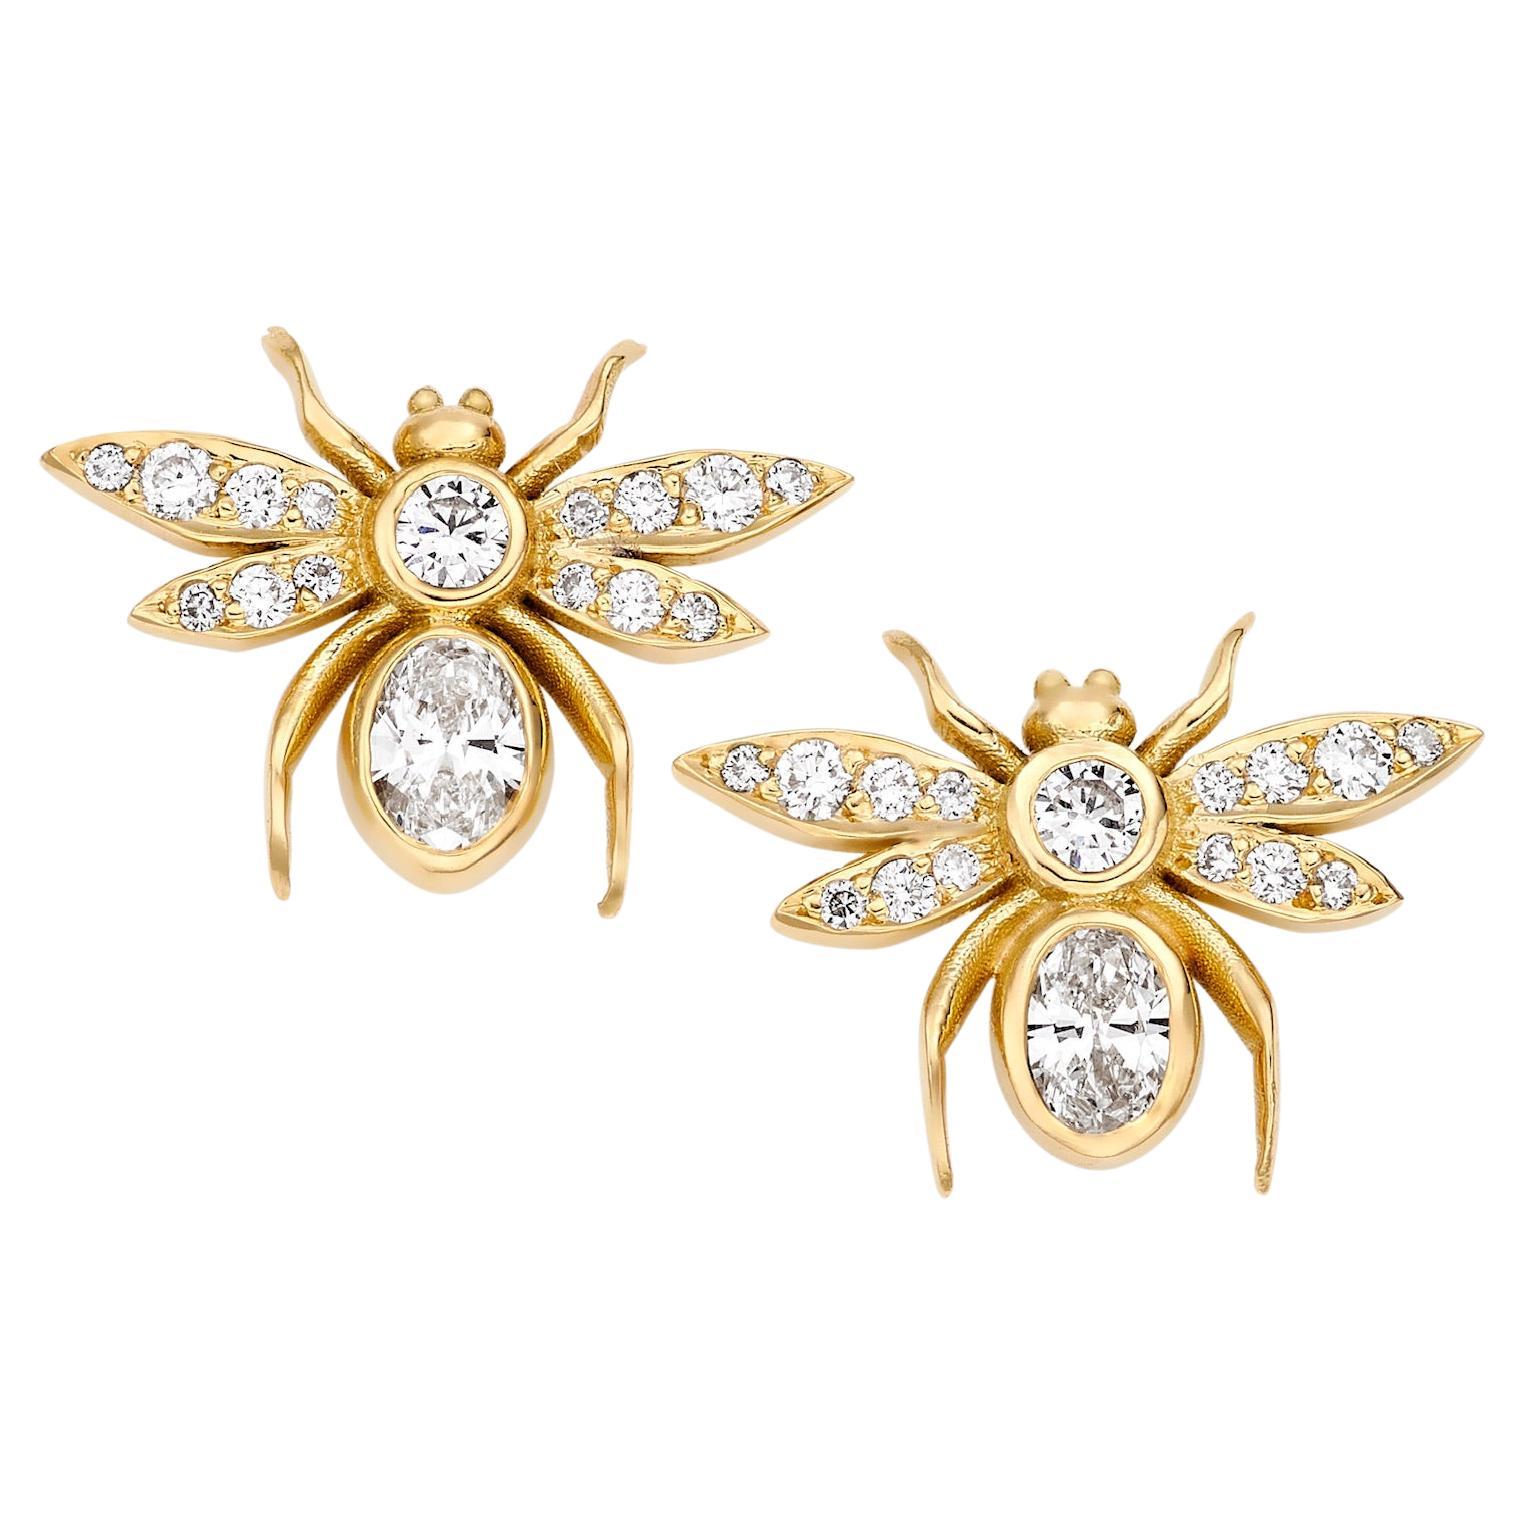 Lilly Hastedt, clous d'oreilles mini insect